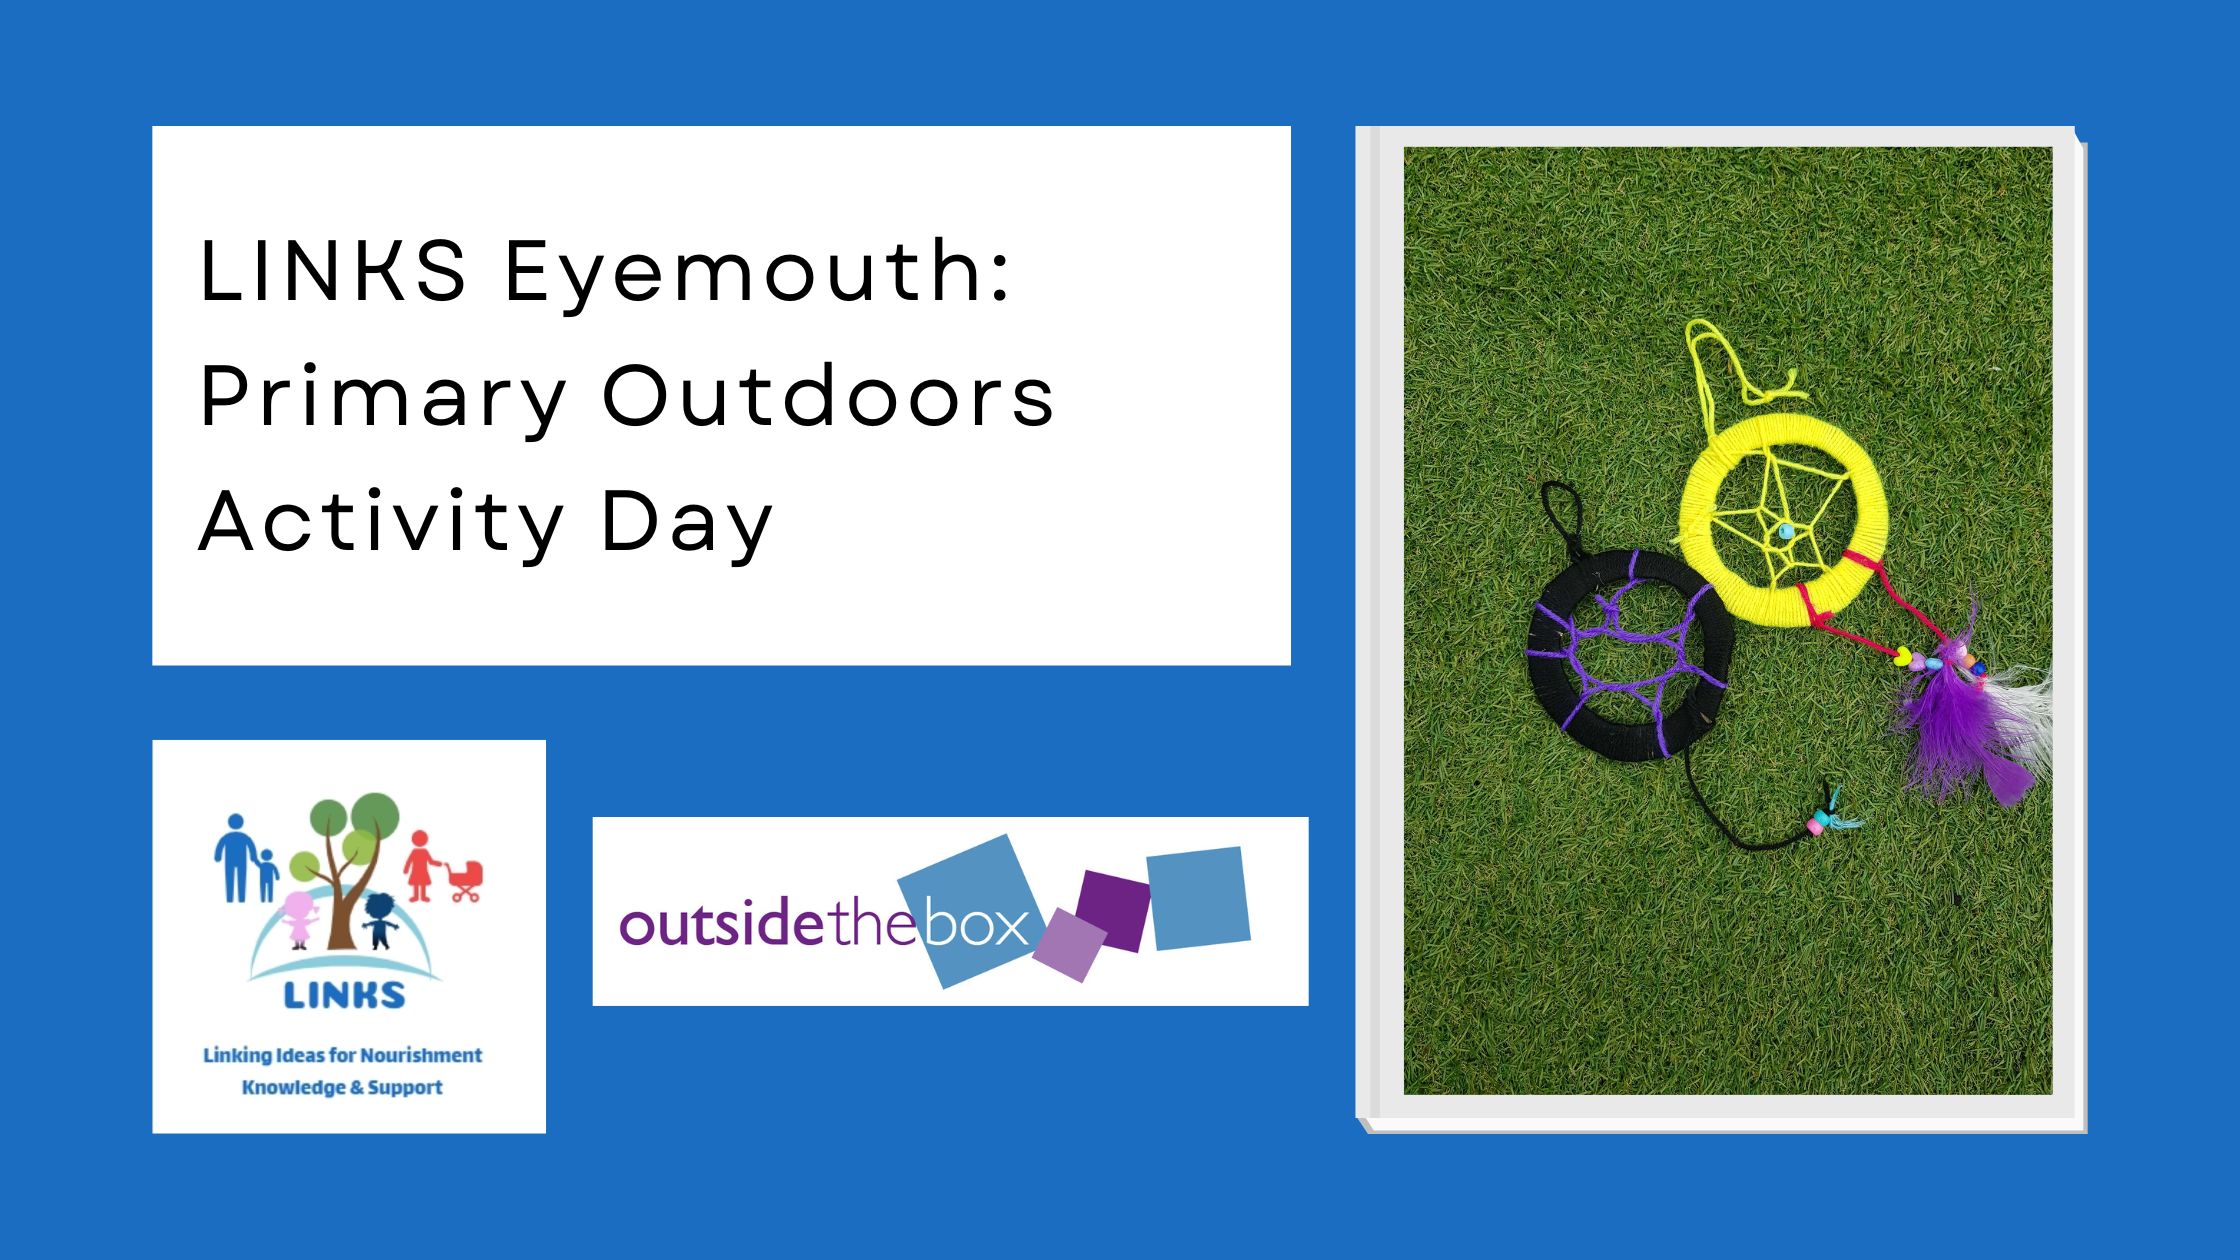 LINKS Eyemouth: Primary Outdoors Activity Day